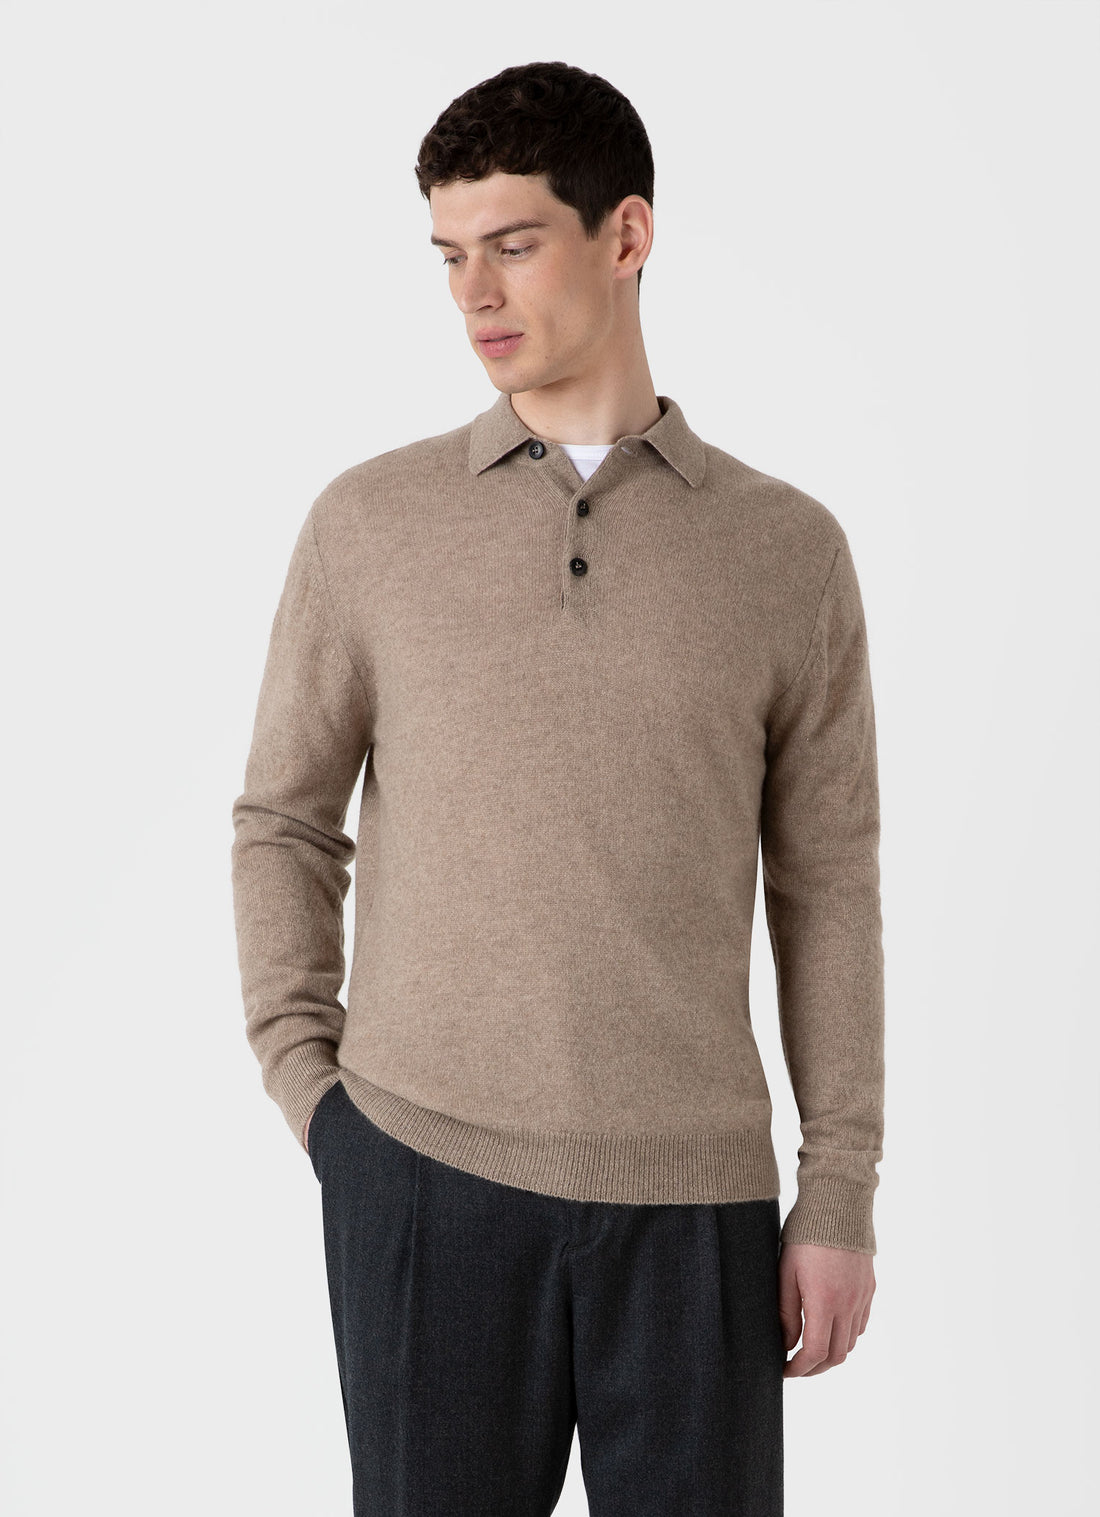 Men's Cashmere Polo Shirt in Natural Brown